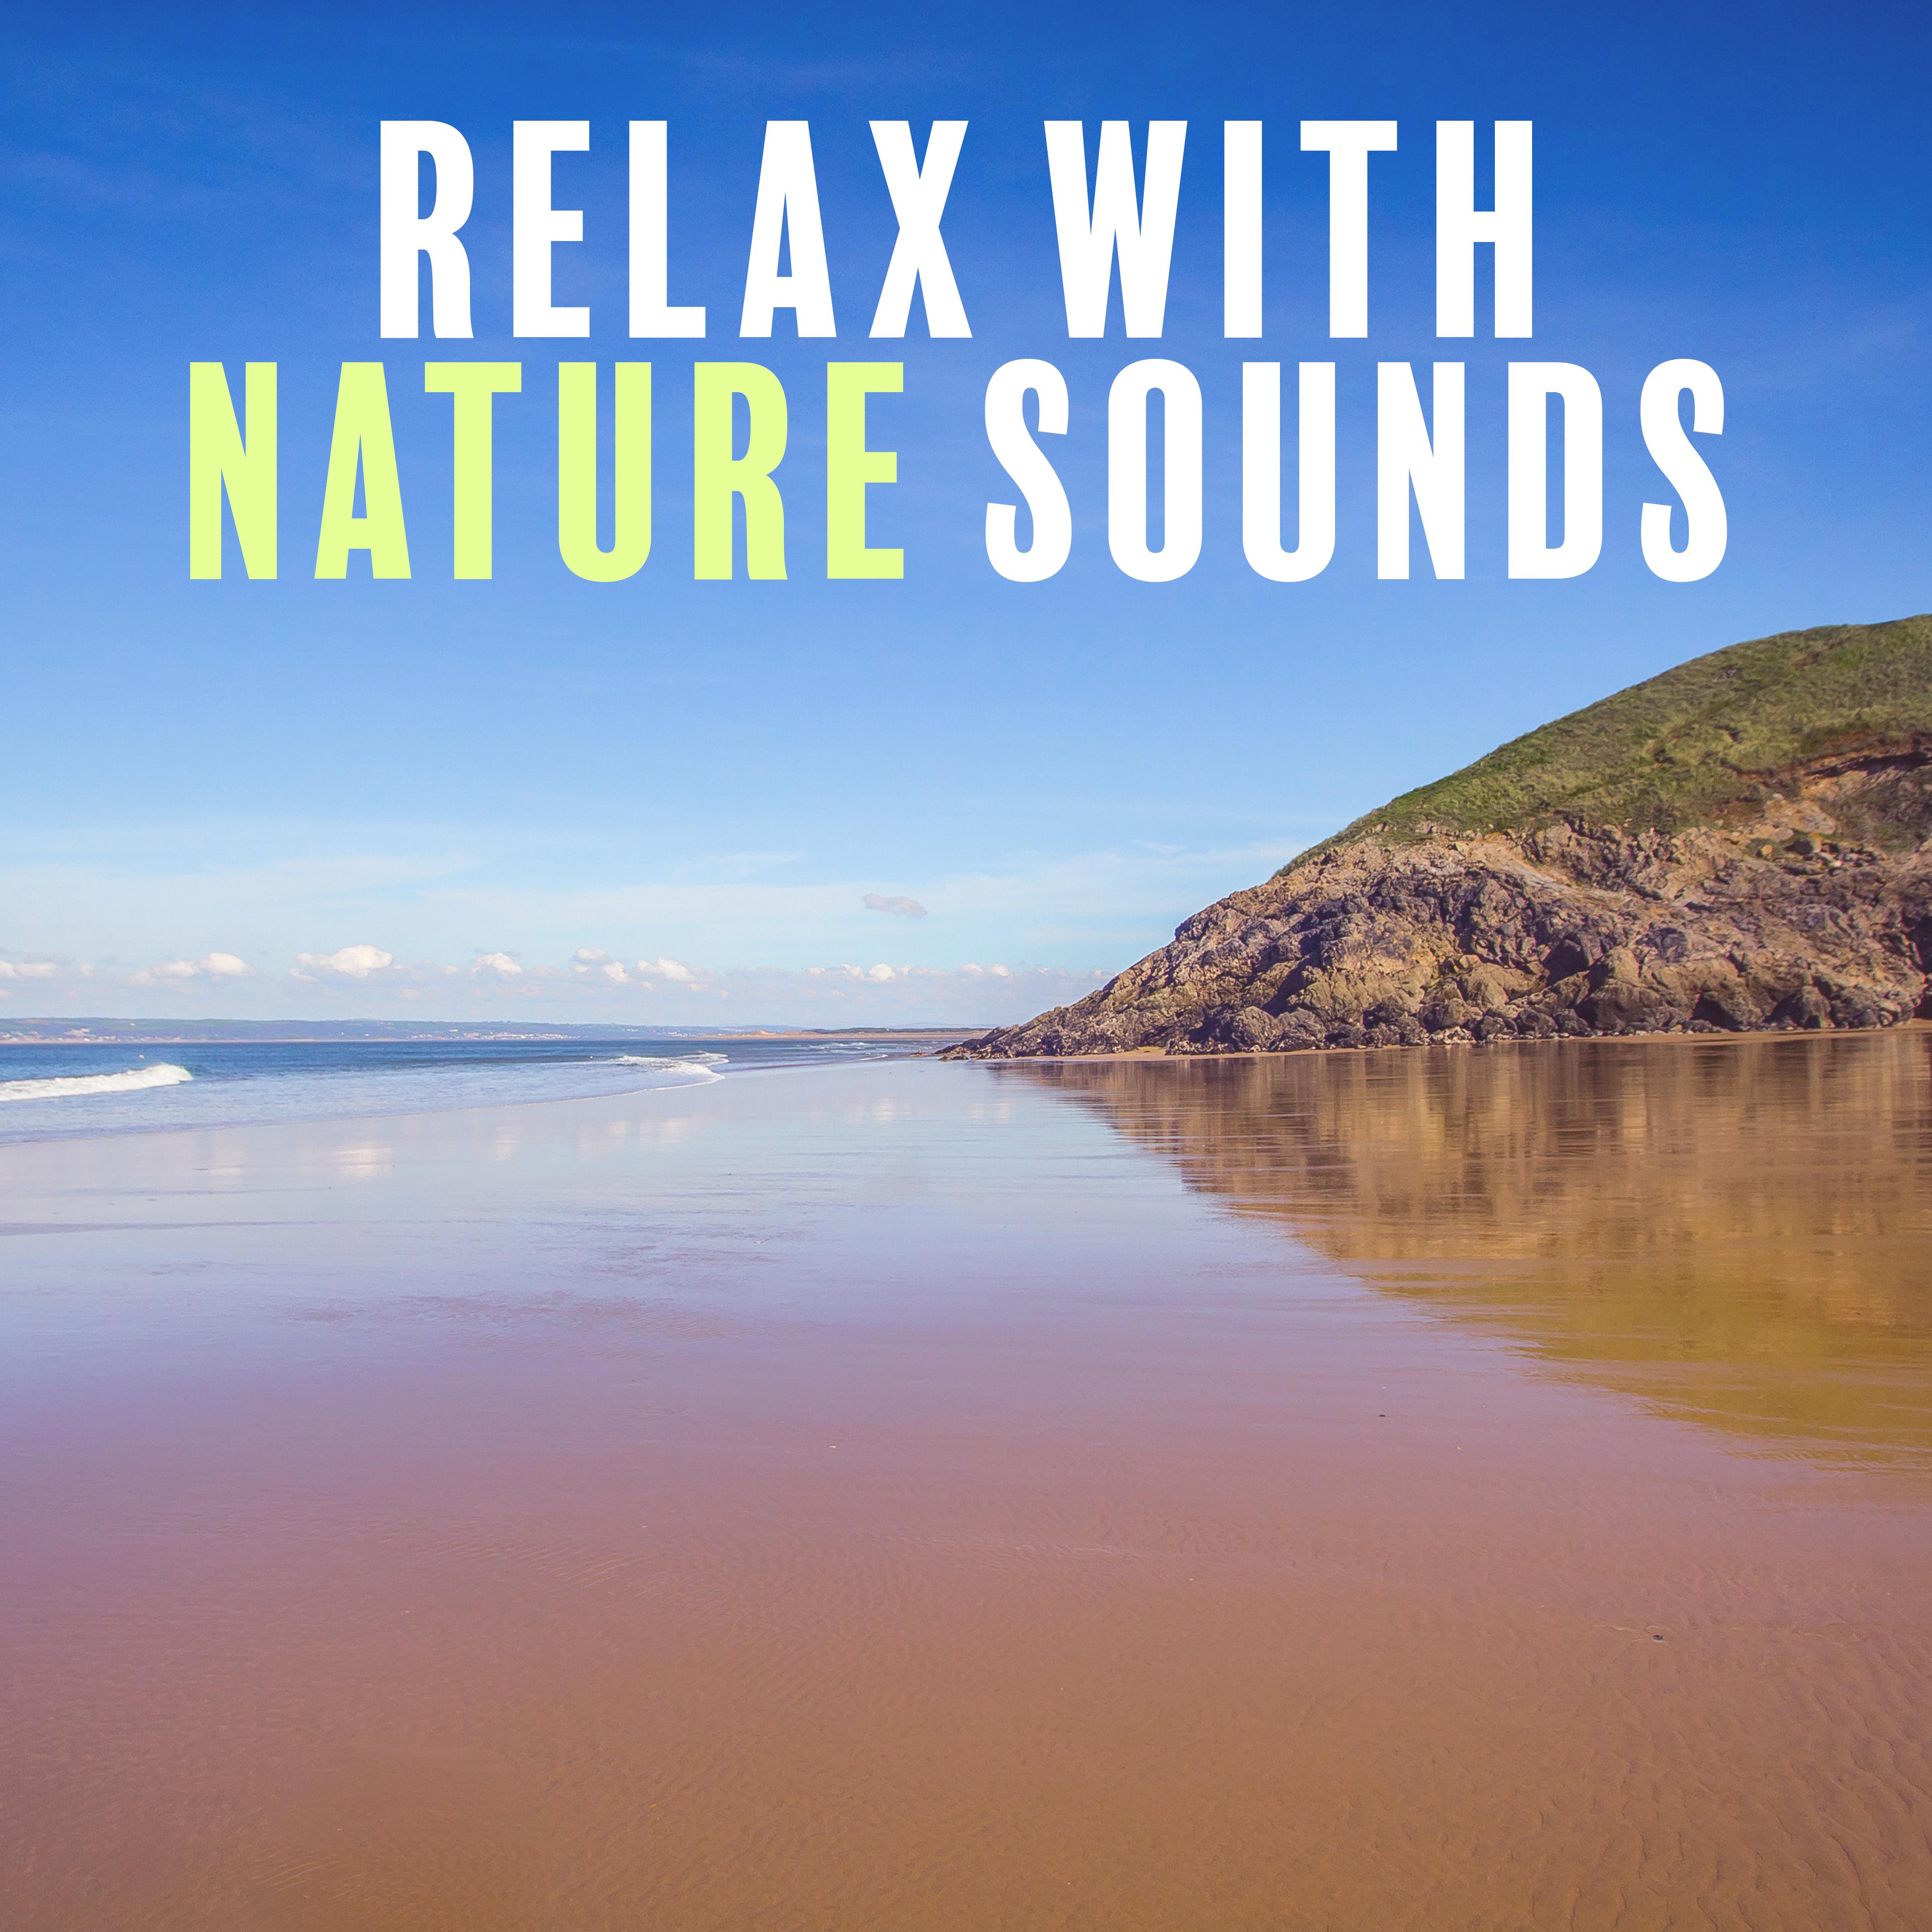 Relax with Nature Sounds – Waves of Calmness, Peaceful Music, Nature Sounds to Stress Relief, New Age Music